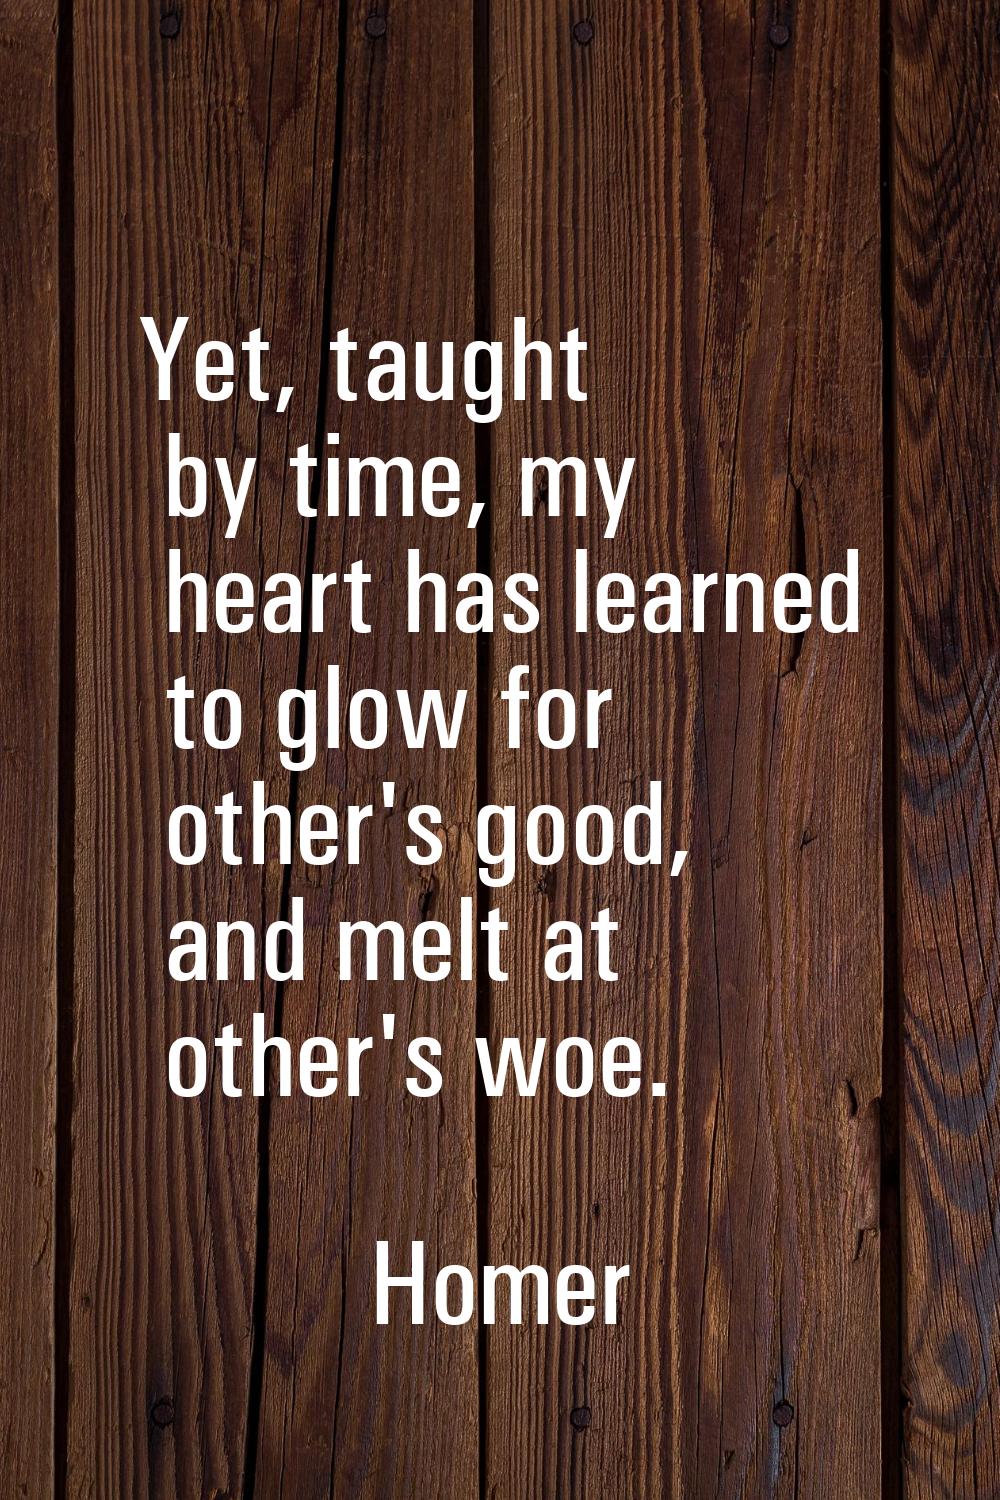 Yet, taught by time, my heart has learned to glow for other's good, and melt at other's woe.